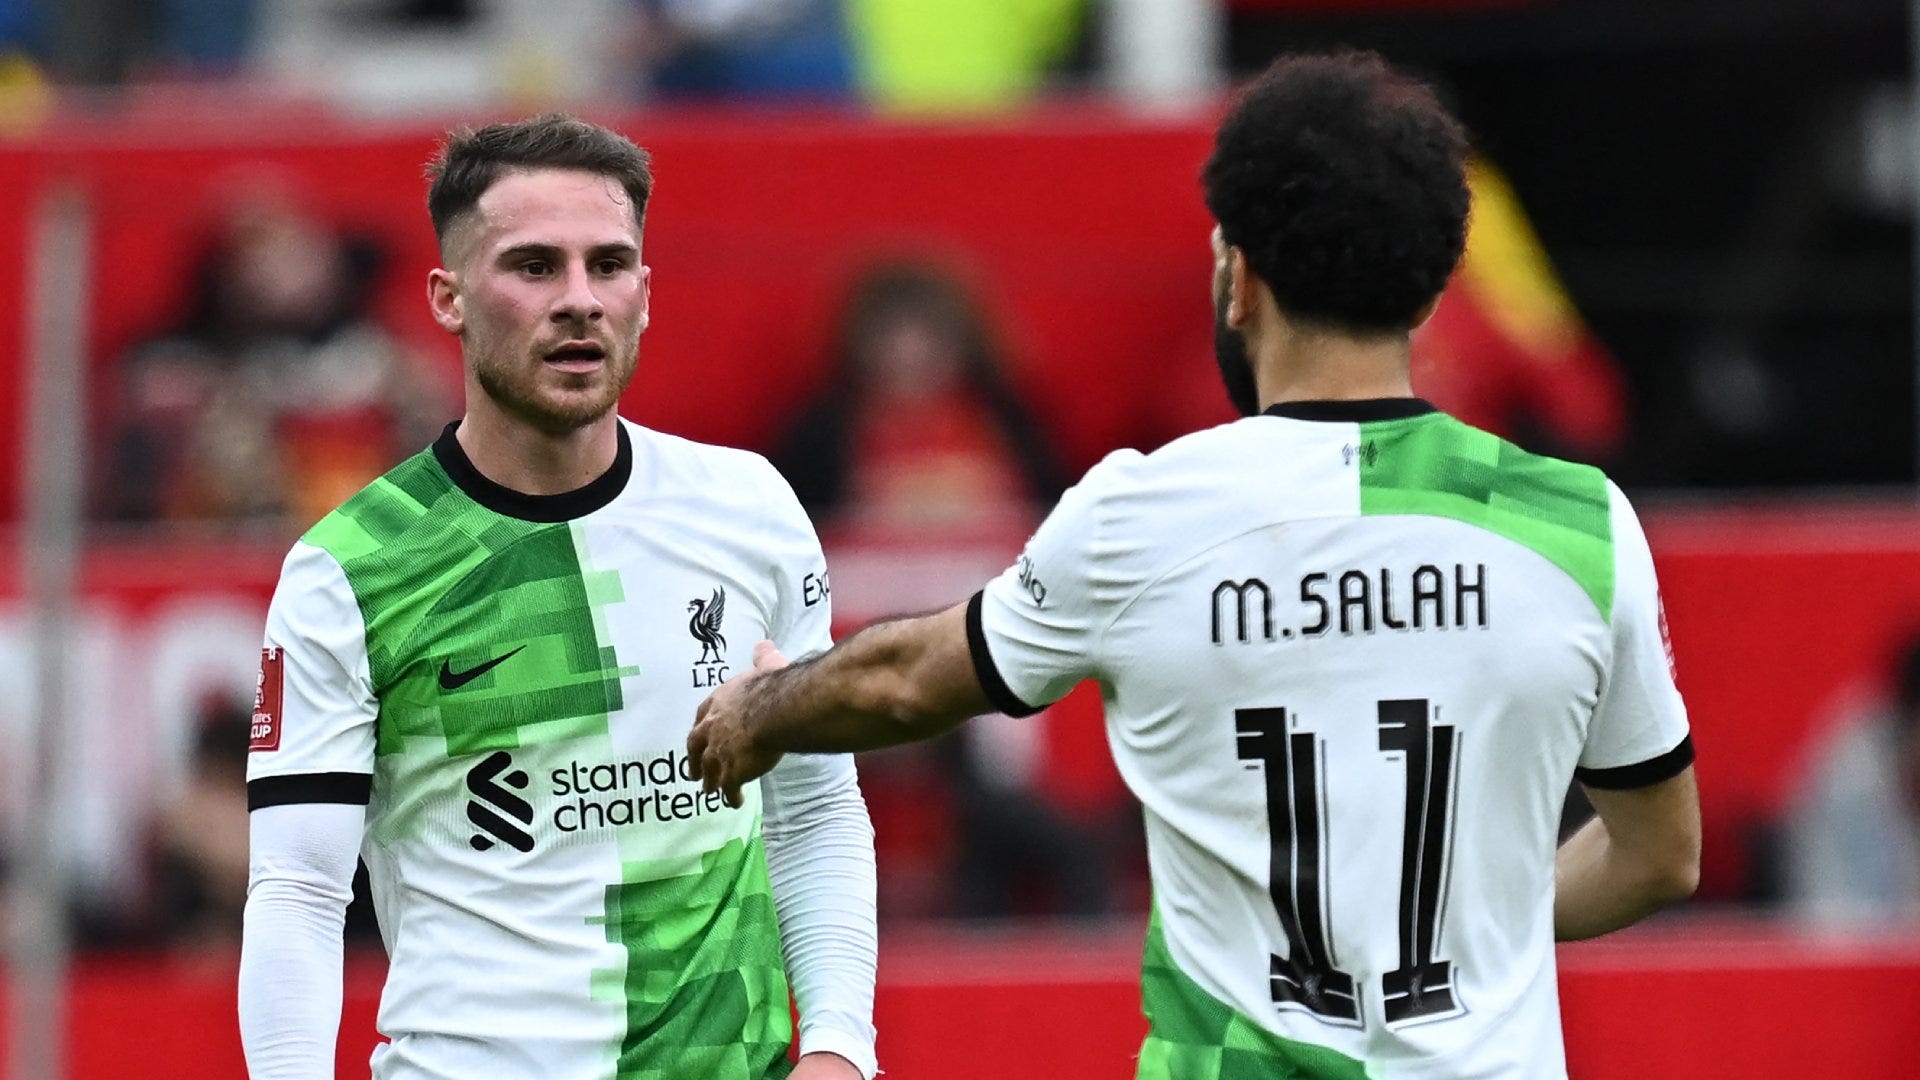 'What are you doing?!' - Alexis Mac Allister reveals Mohamed Salah warning saw him make swift wardrobe adjustment after Liverpool move